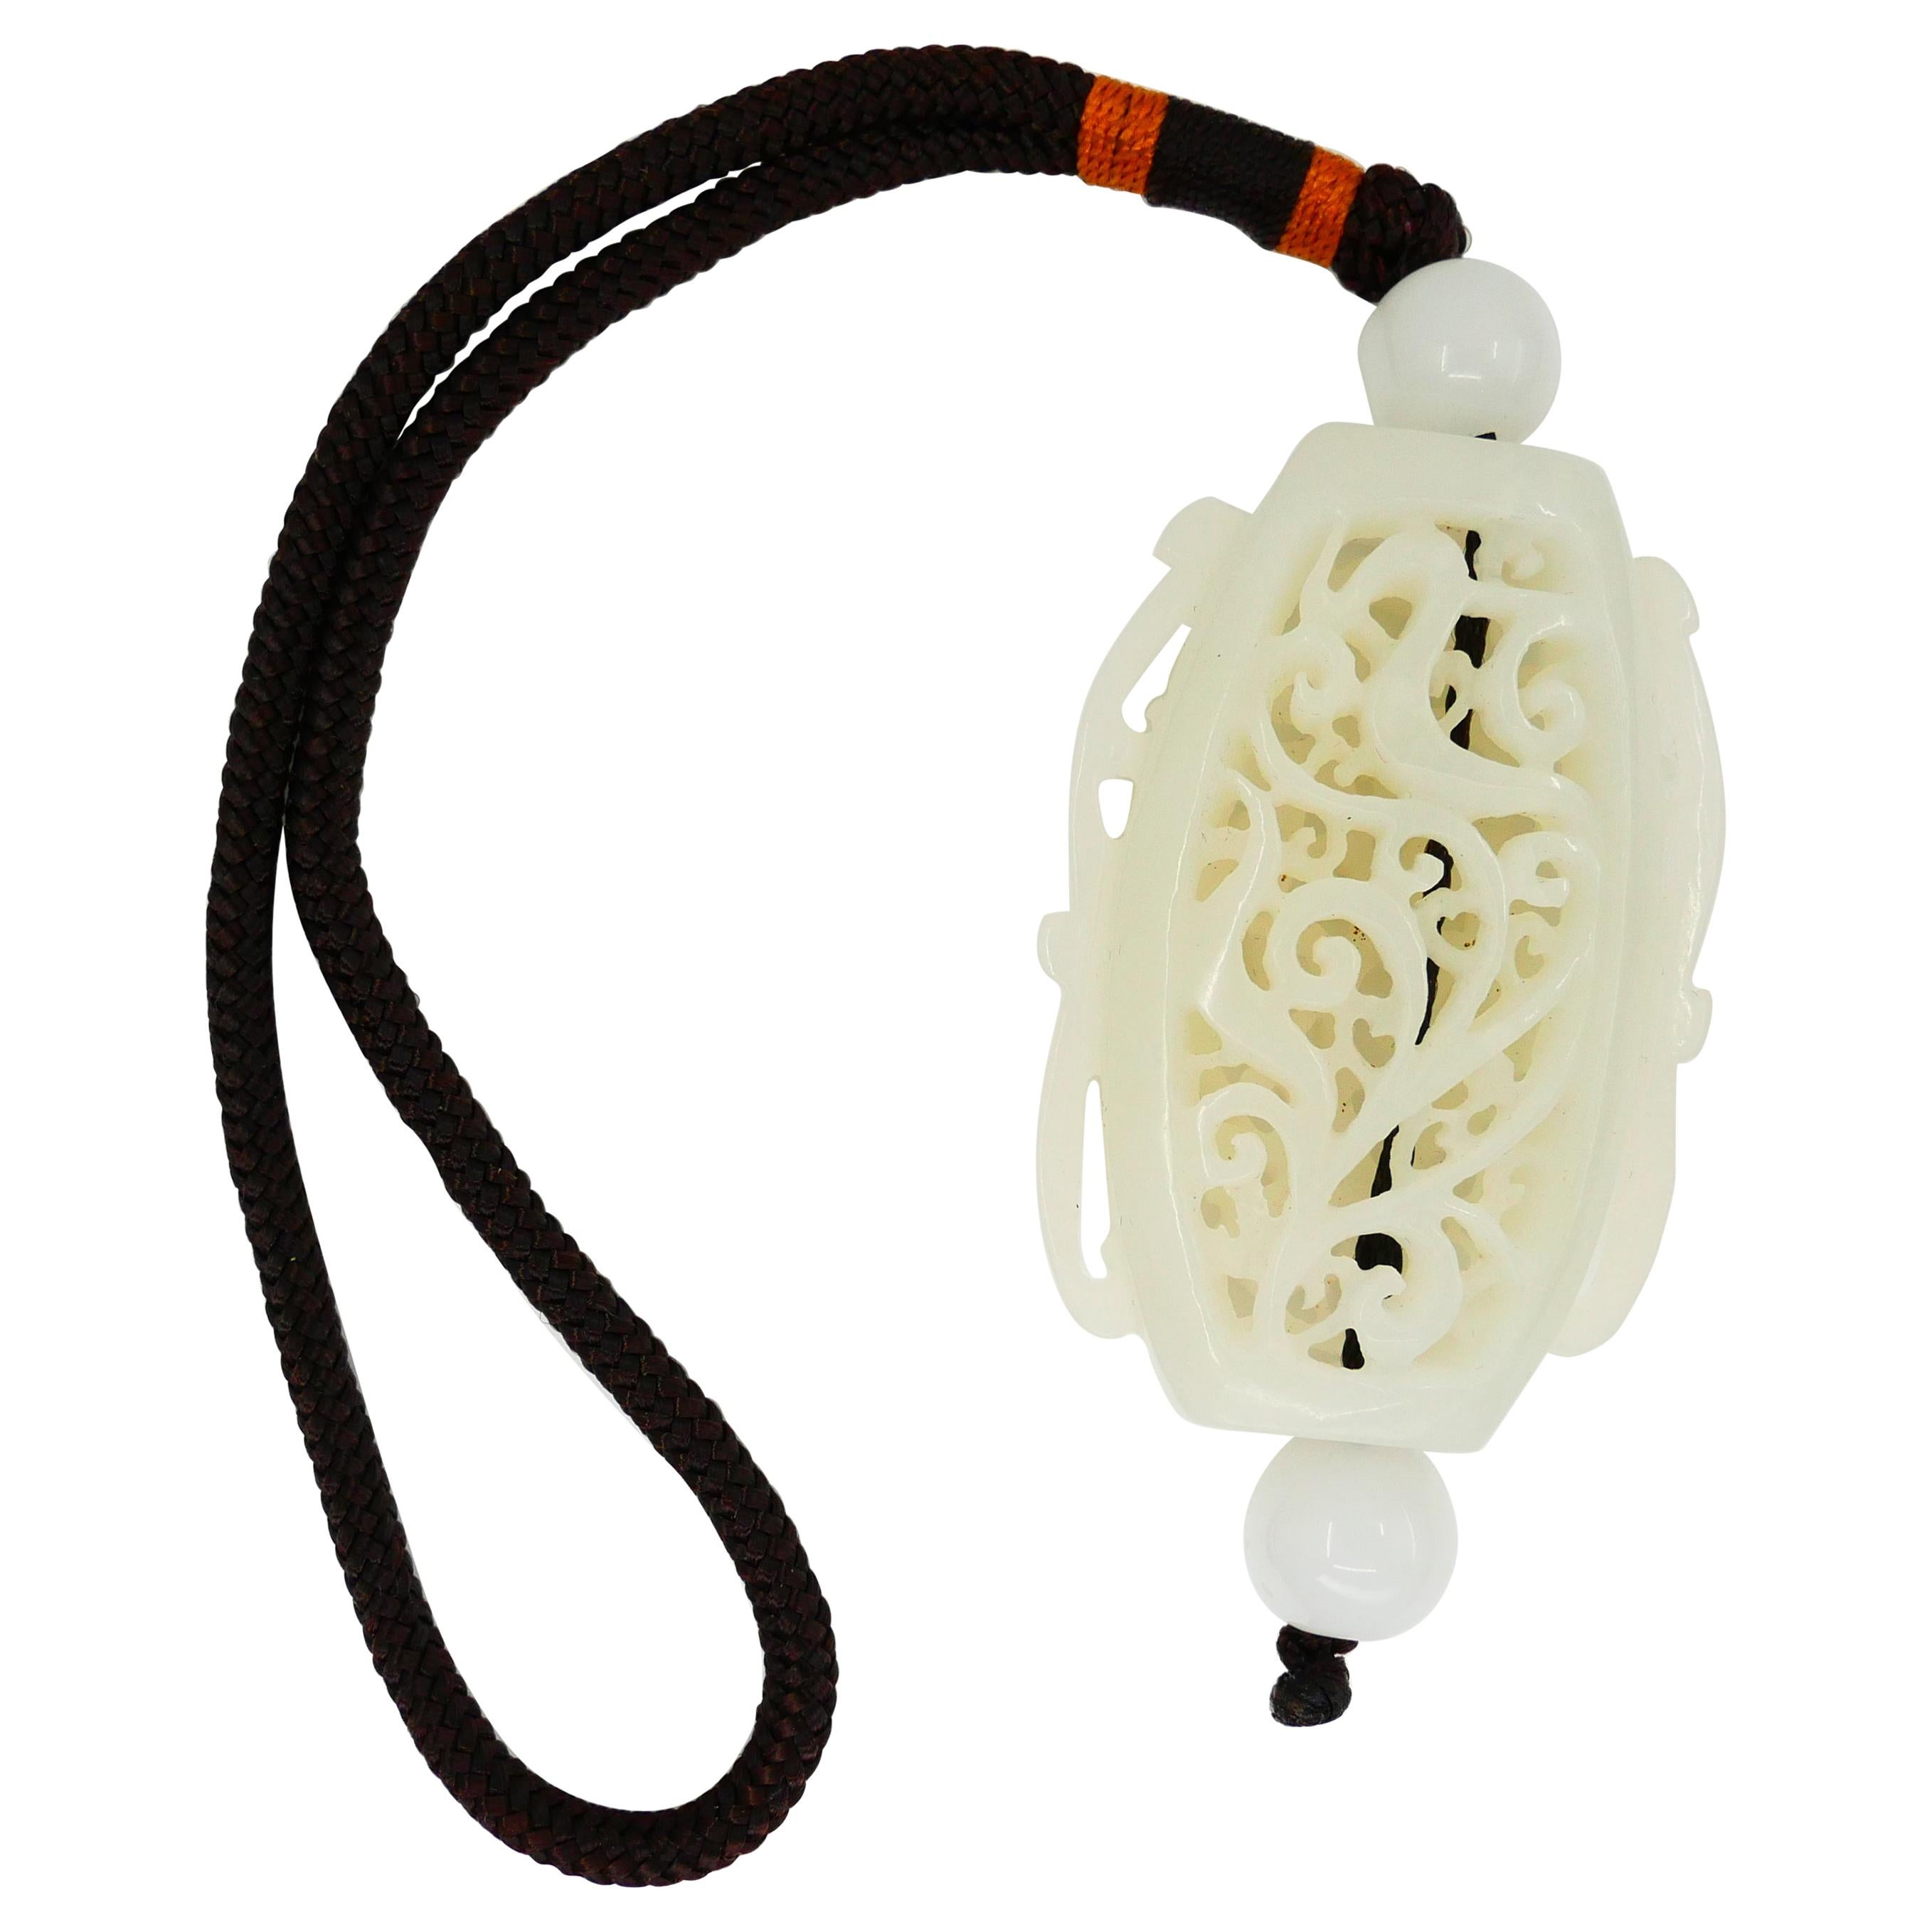 Certified Natural Nephrite White Jade Handheld Decoration Can Convert to Pendant For Sale